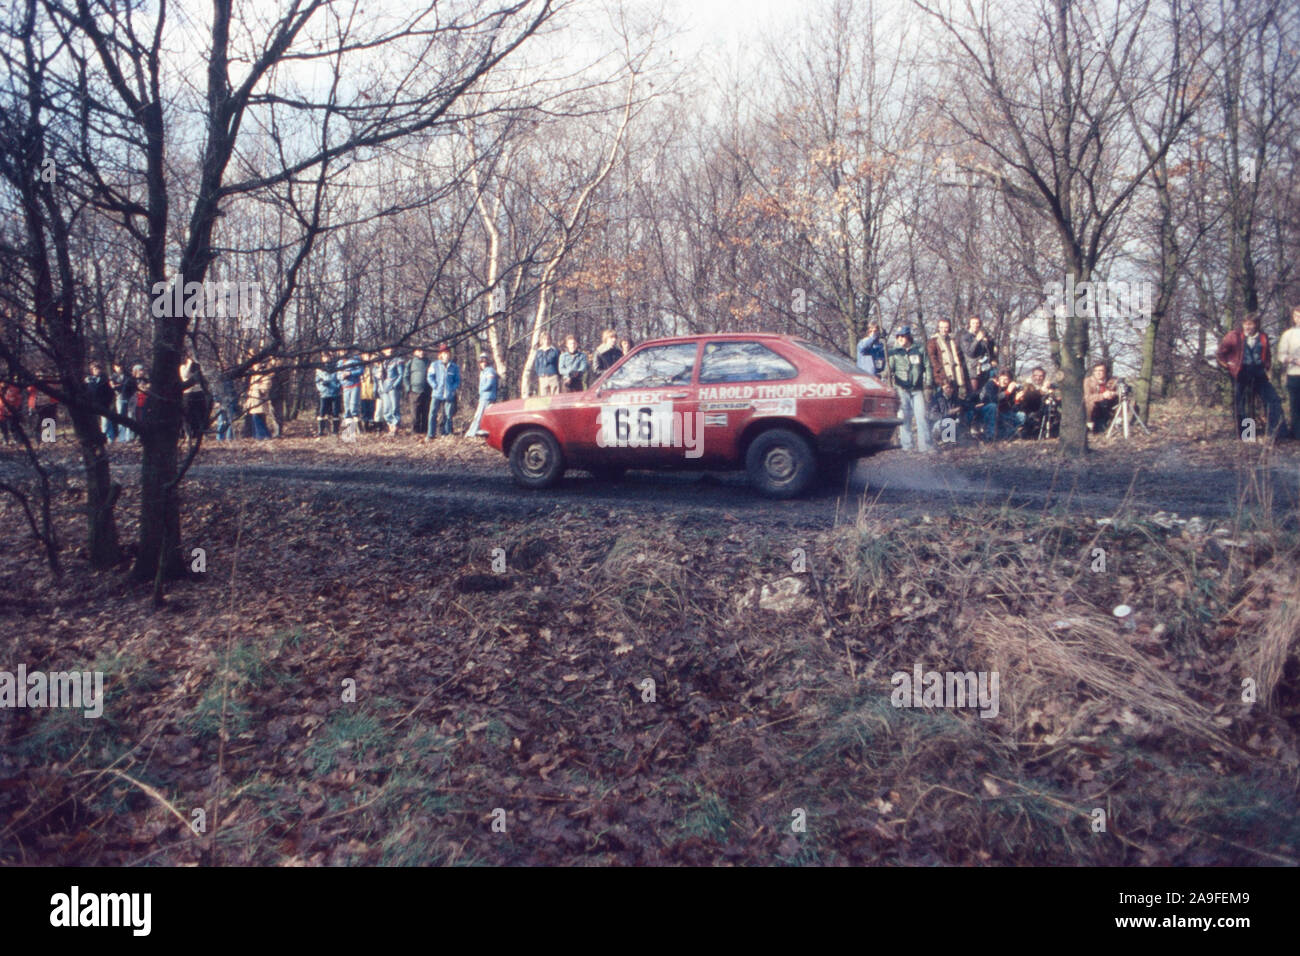 1975 vauxhall car rallying, Angleterre du Nord, Royaume-Uni Banque D'Images